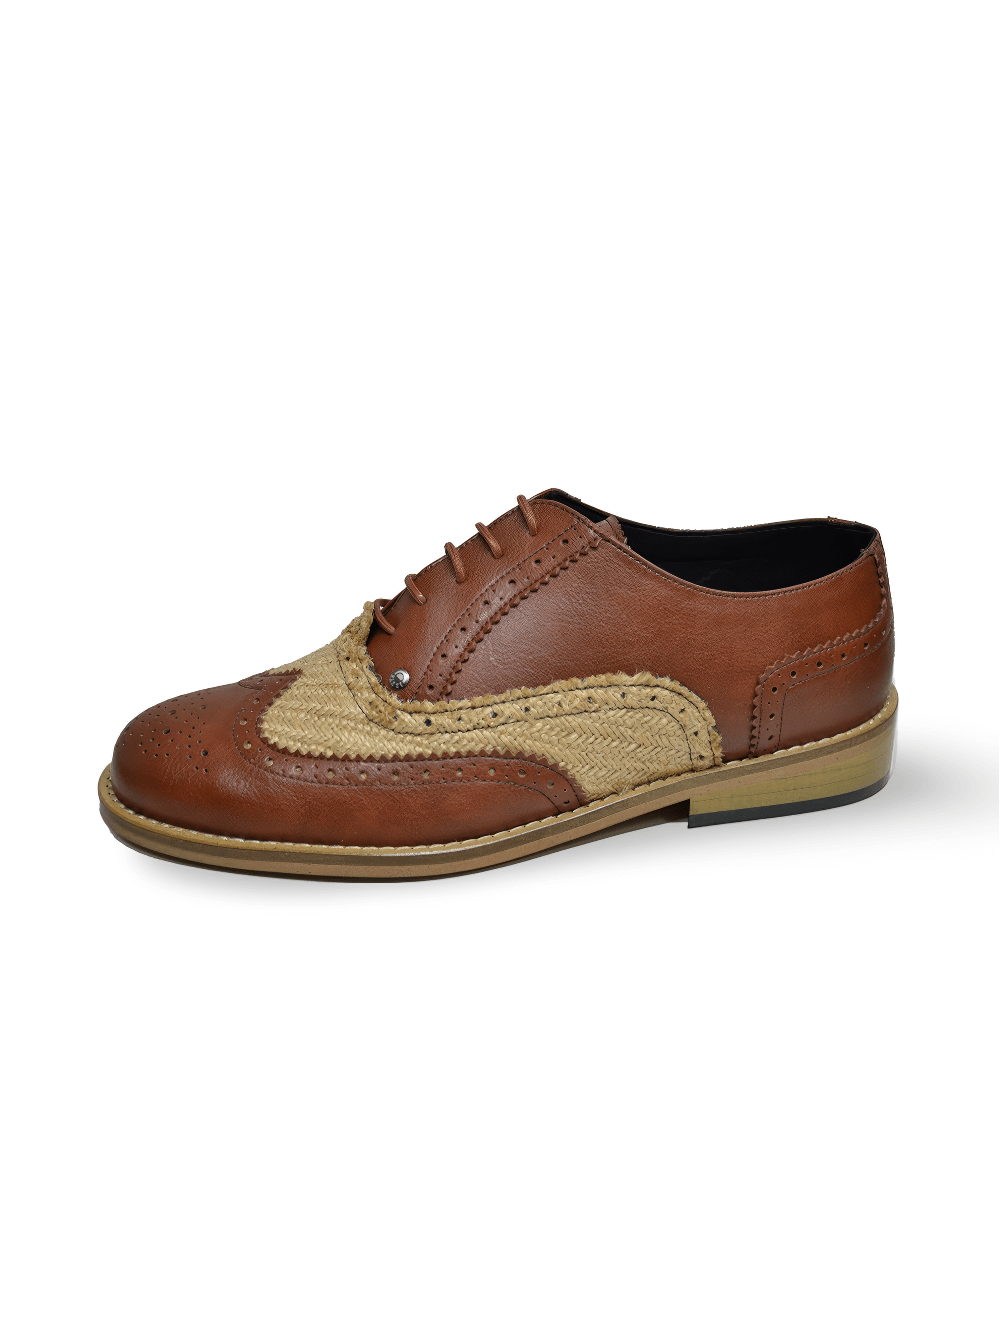 Stylish Brown Lace-Up Leather Oxford Shoes for Men